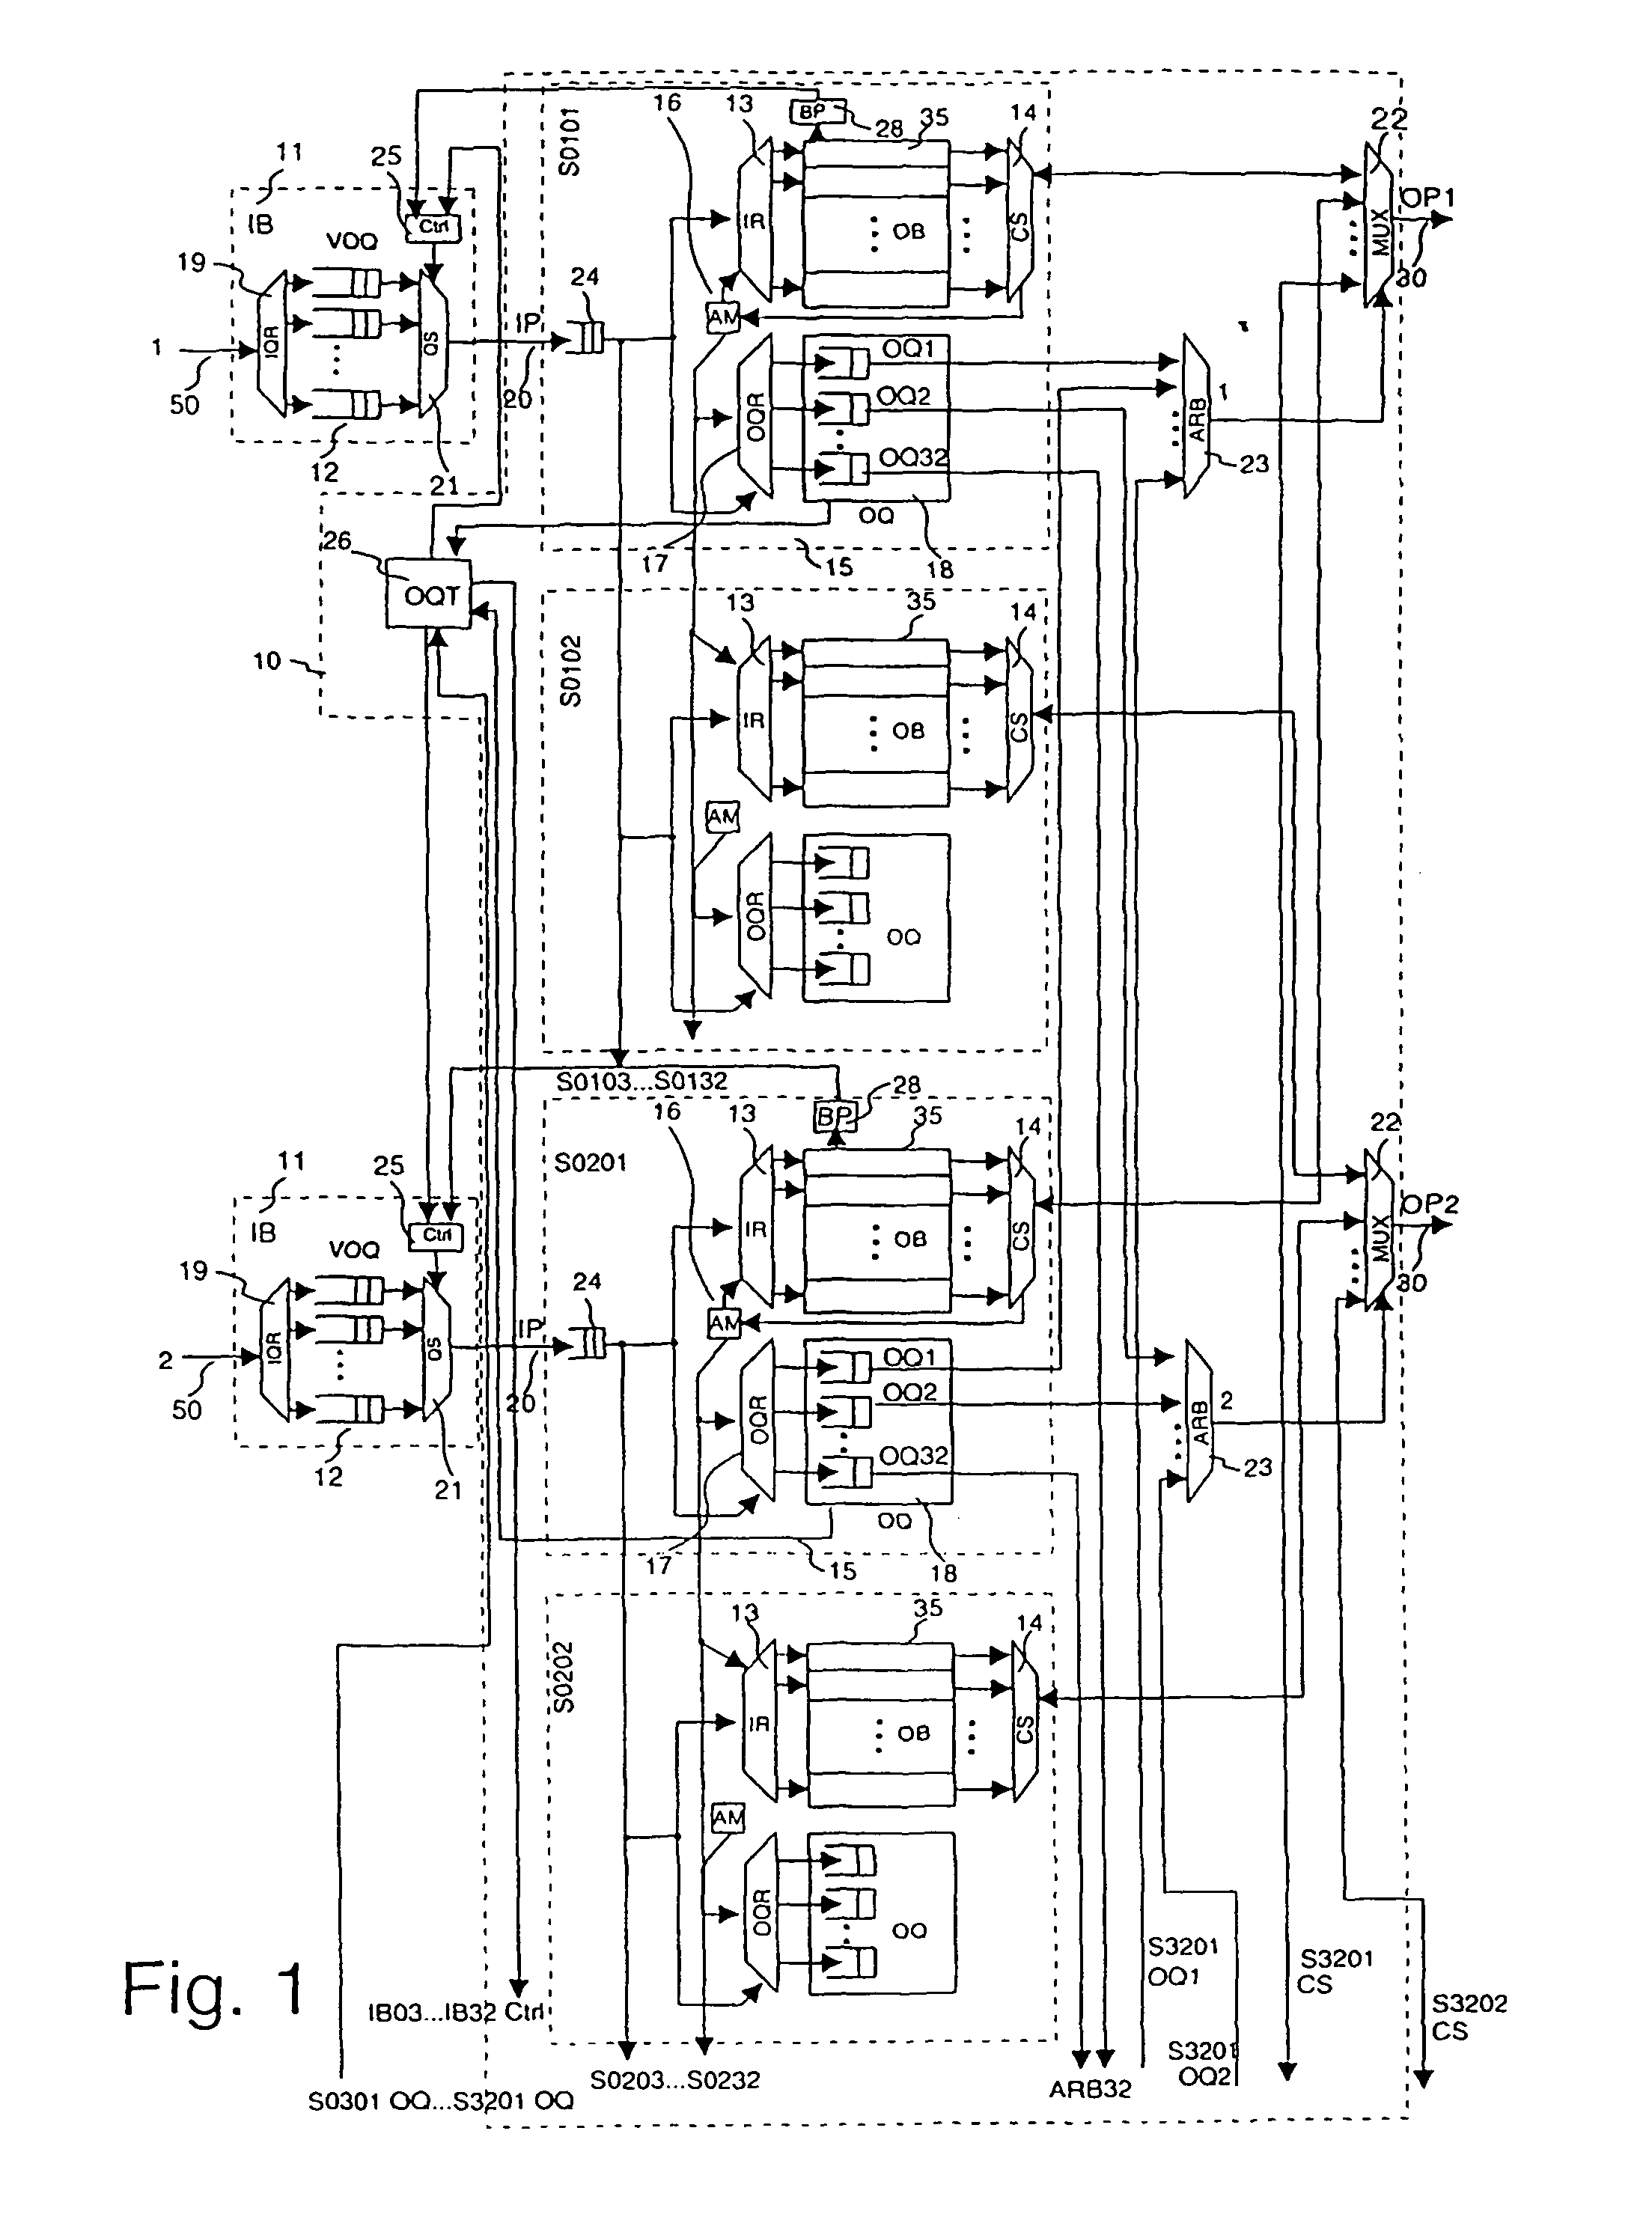 Switching arrangement and method with separated output buffers